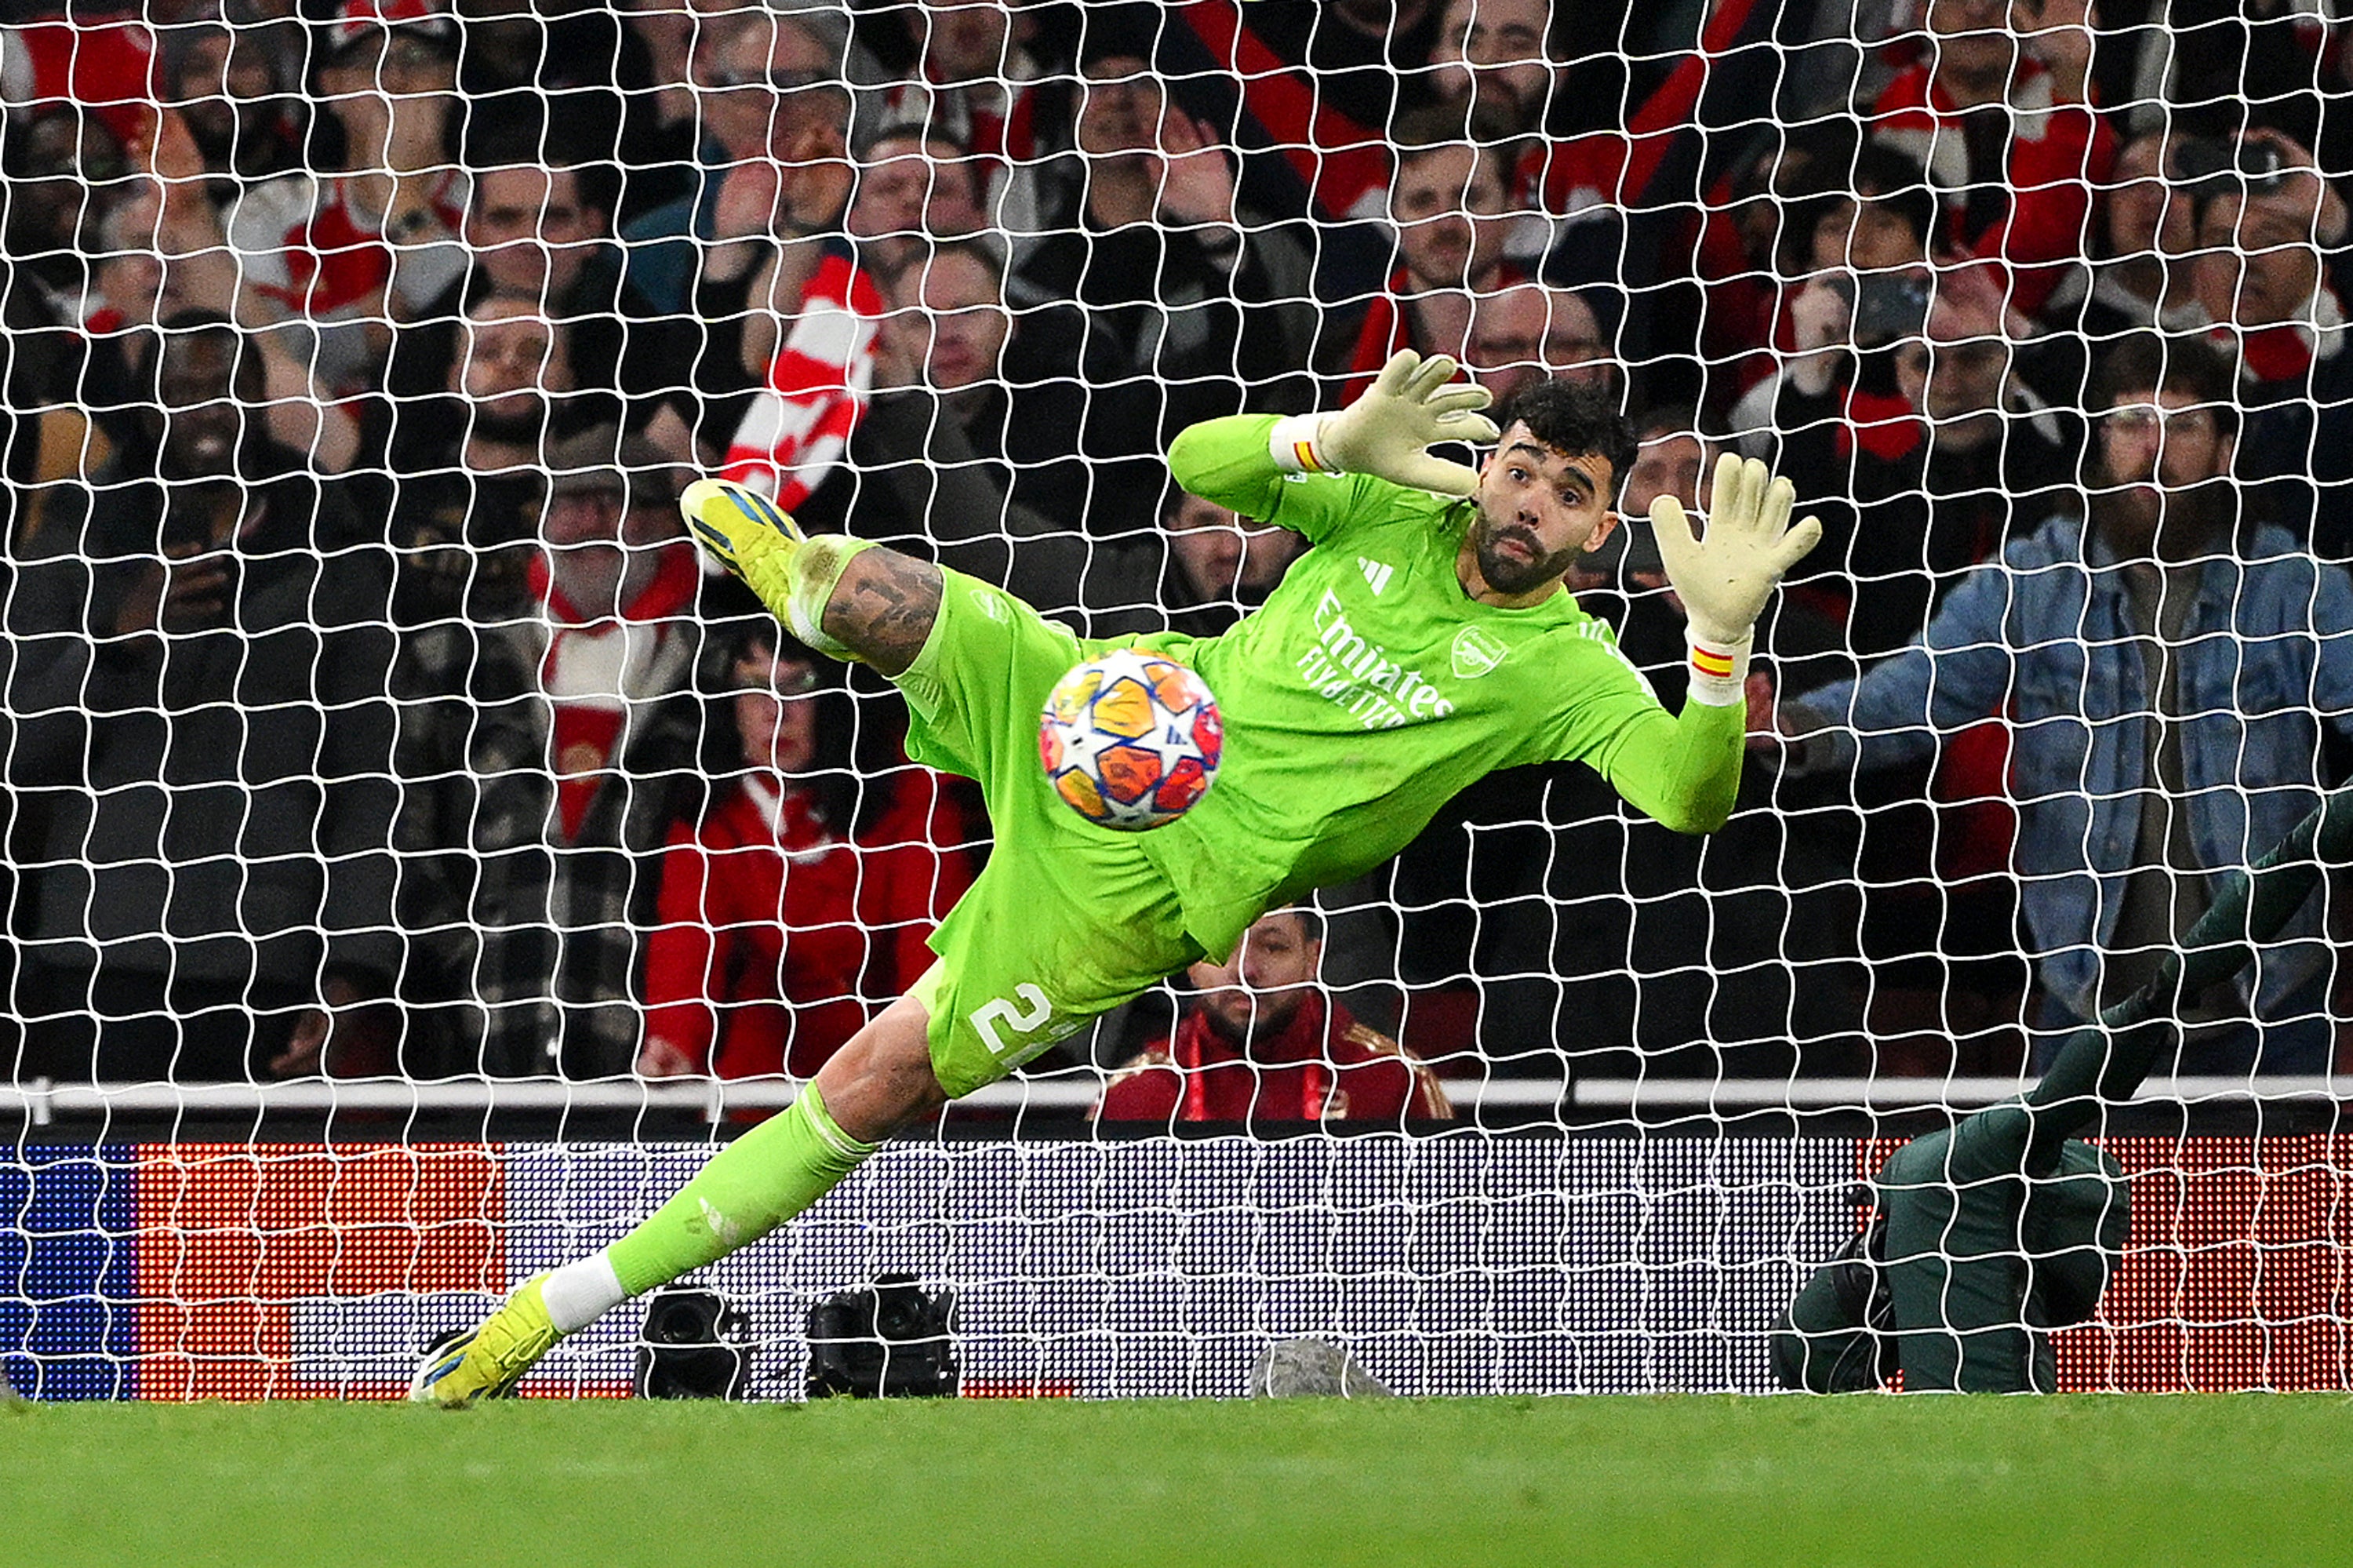 David Raya makes a crucial save from Galeno to secure Arsenal’s place in the next round